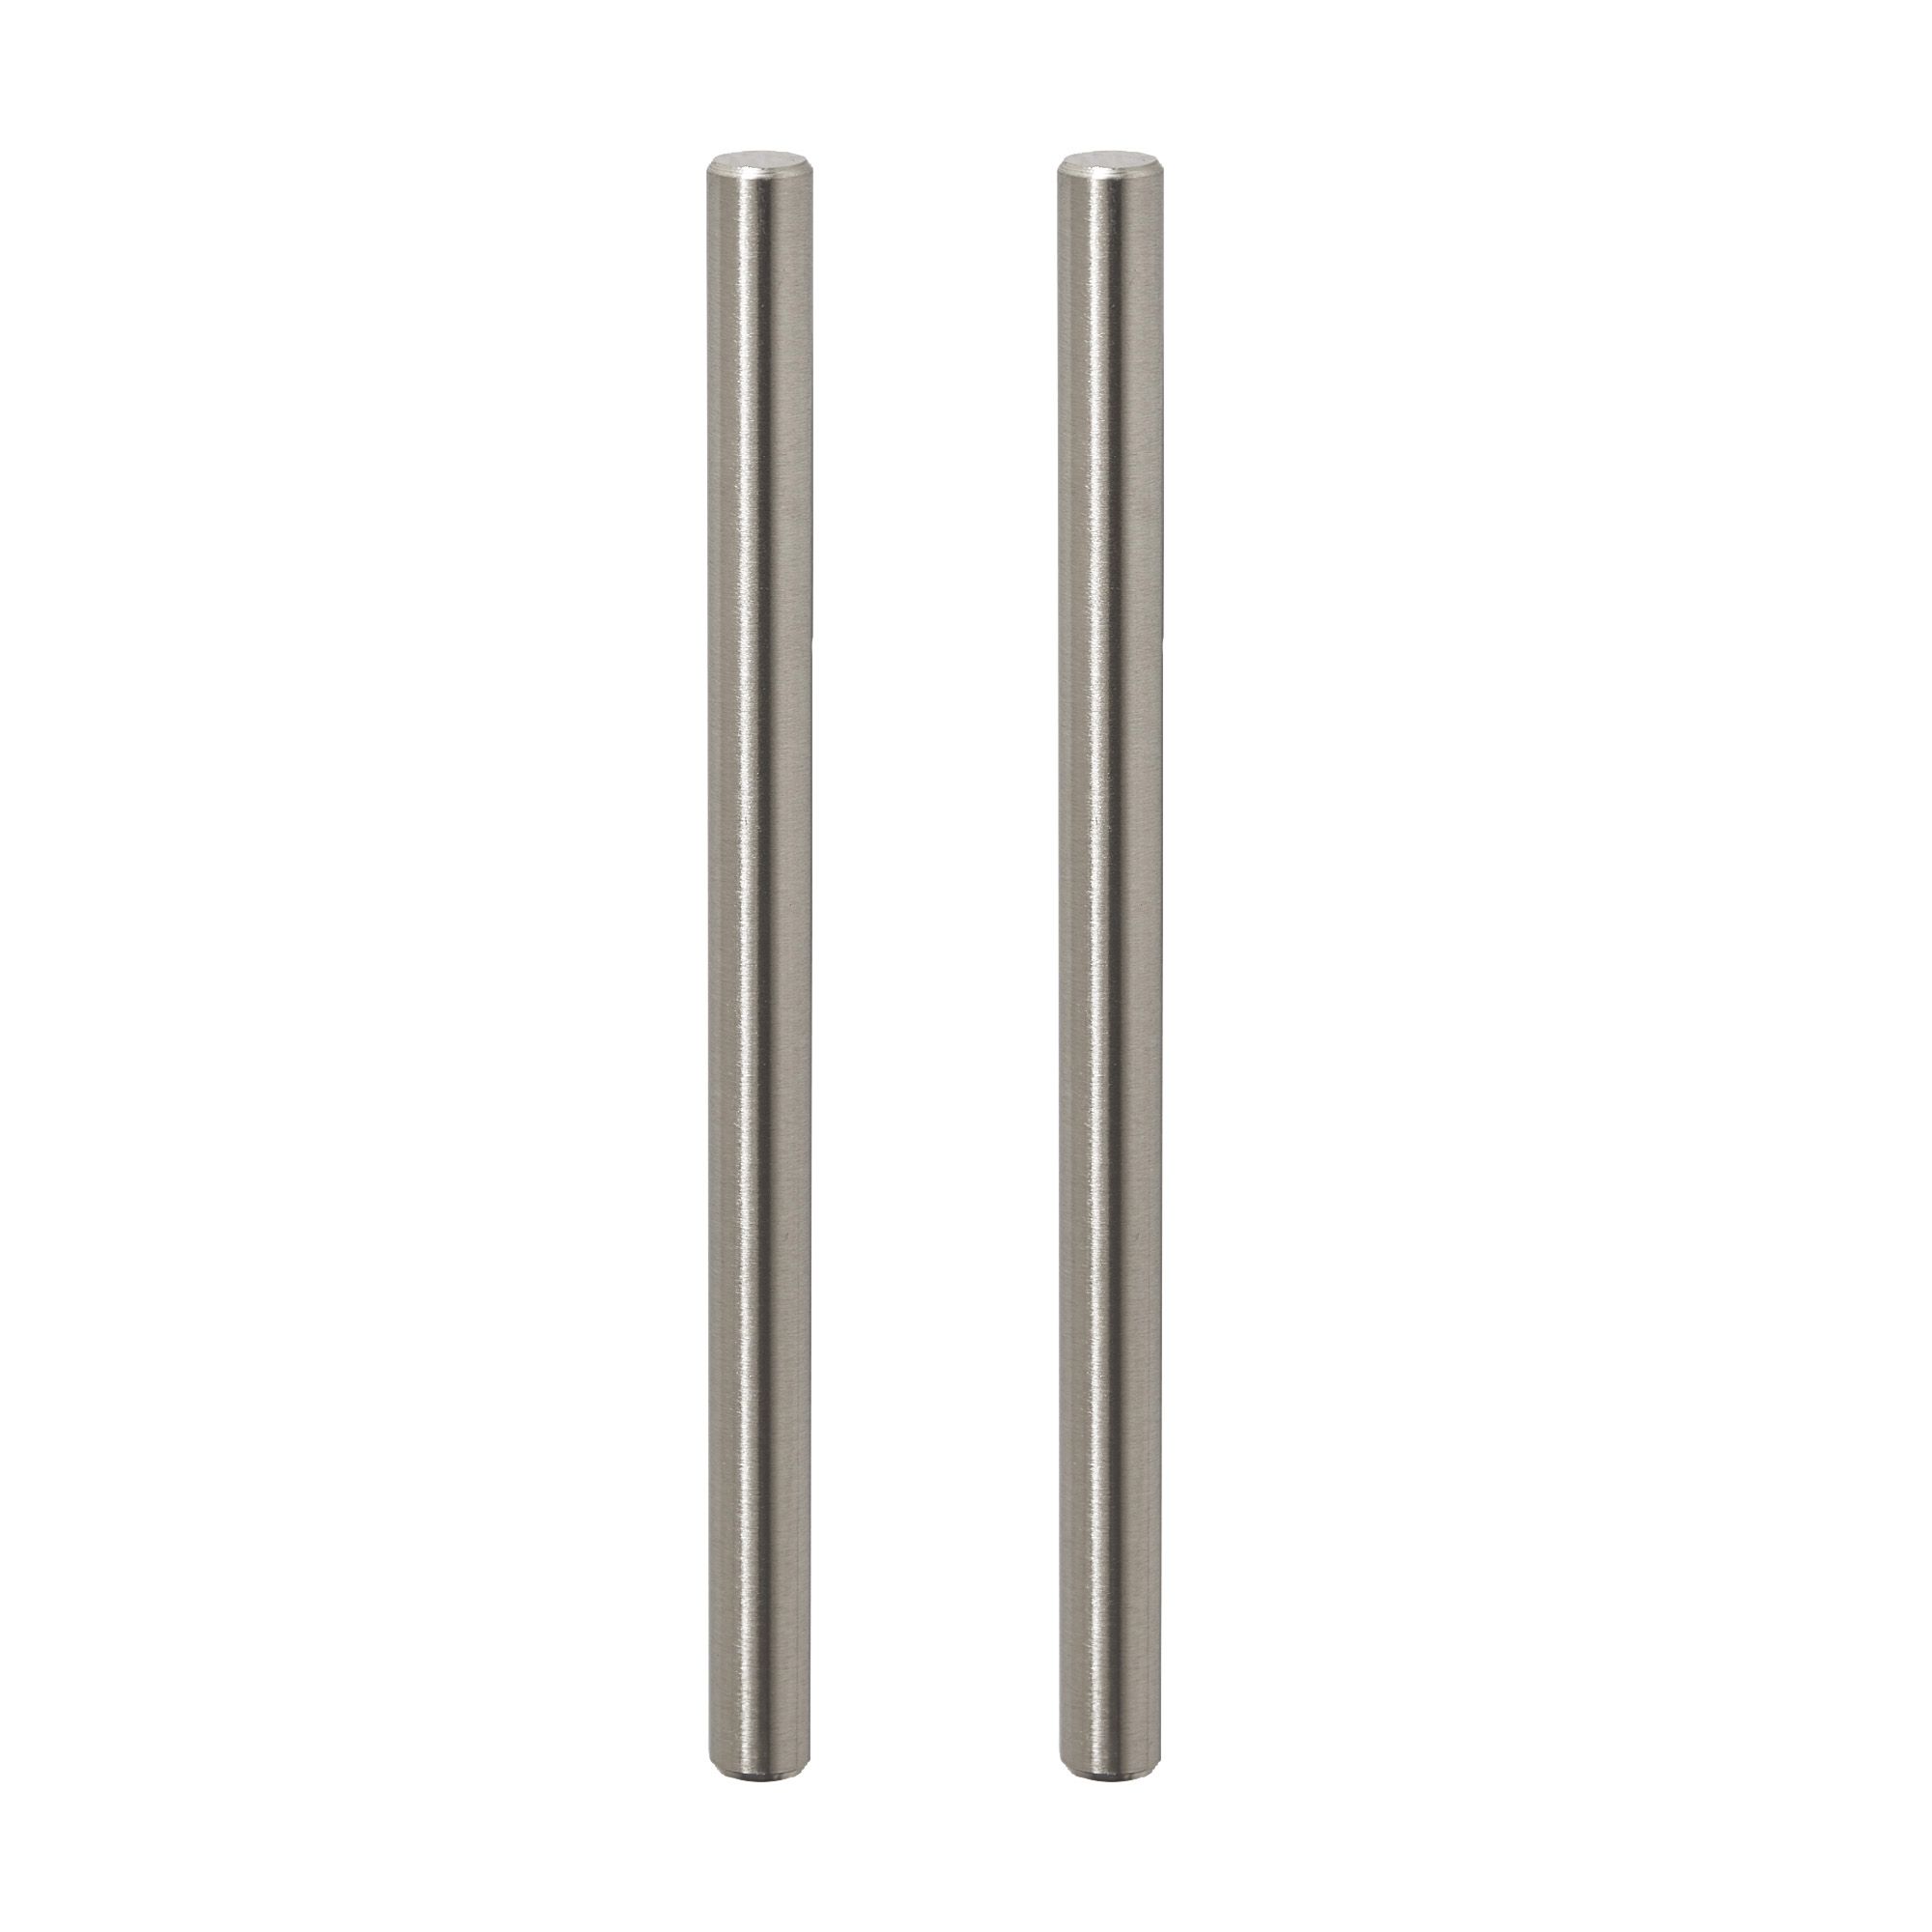 GoodHome Annatto Nickel effect Silver Kitchen cabinets Handle (L)18.8cm, Pack of 2